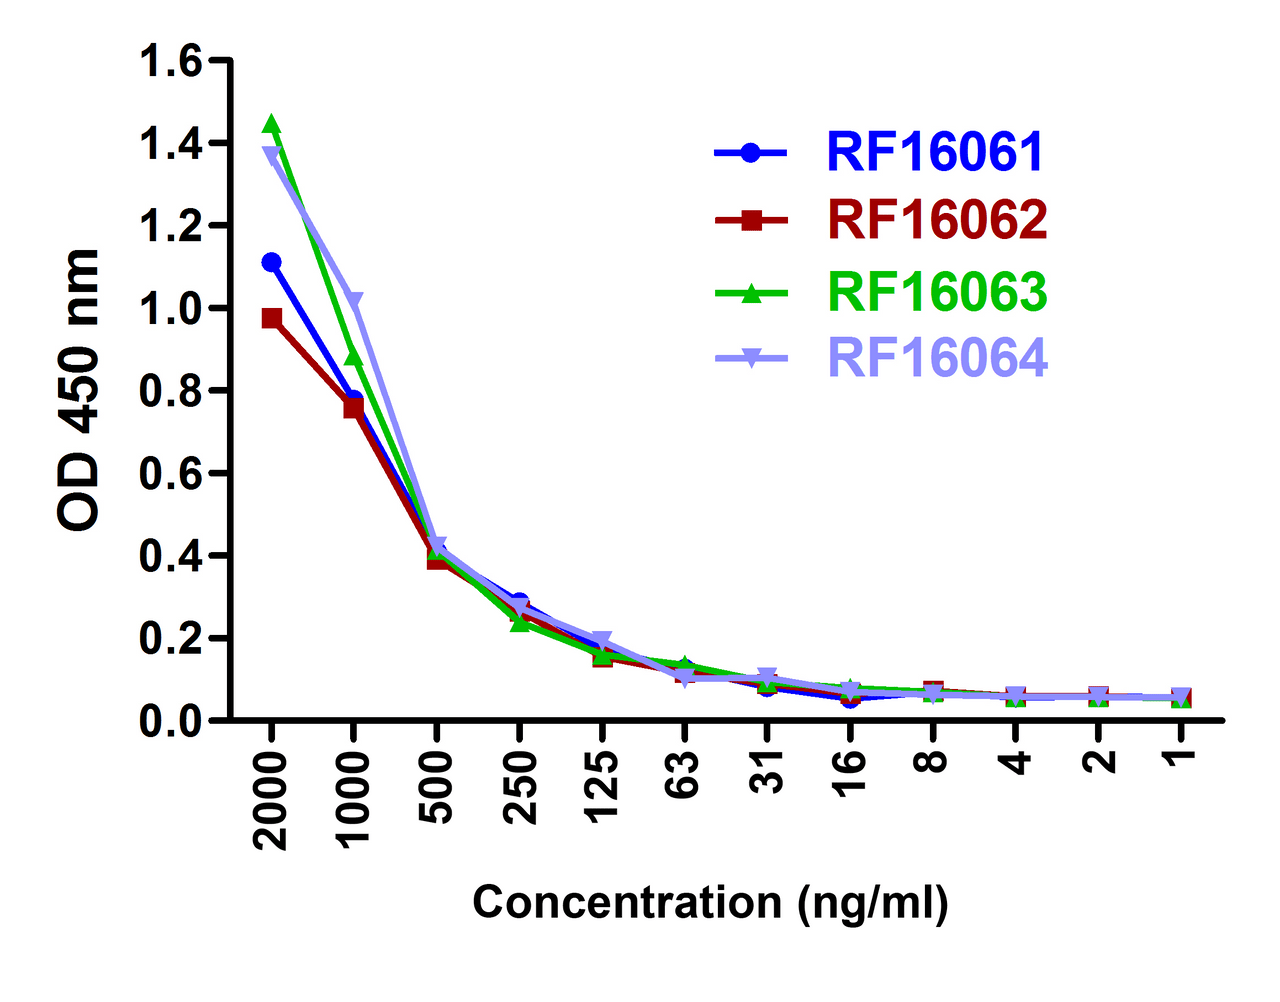 Titration curve analysis of LIGHT mAbs to detect recombinant LIGHT in ELISA with RF16061, RF16062, RF16063, and RF16064 abs at decreasing concentrations.